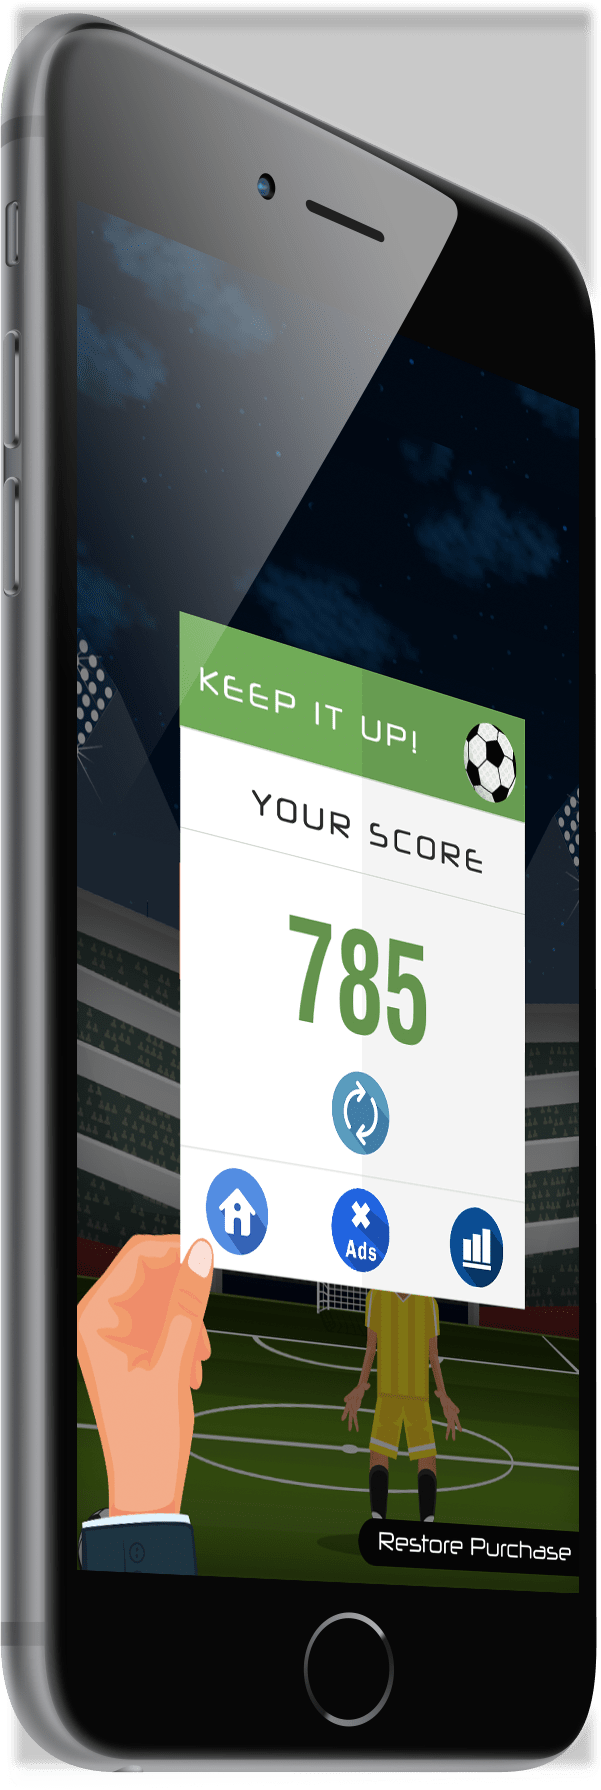 12th Player - iOS, Android, Windows Phone